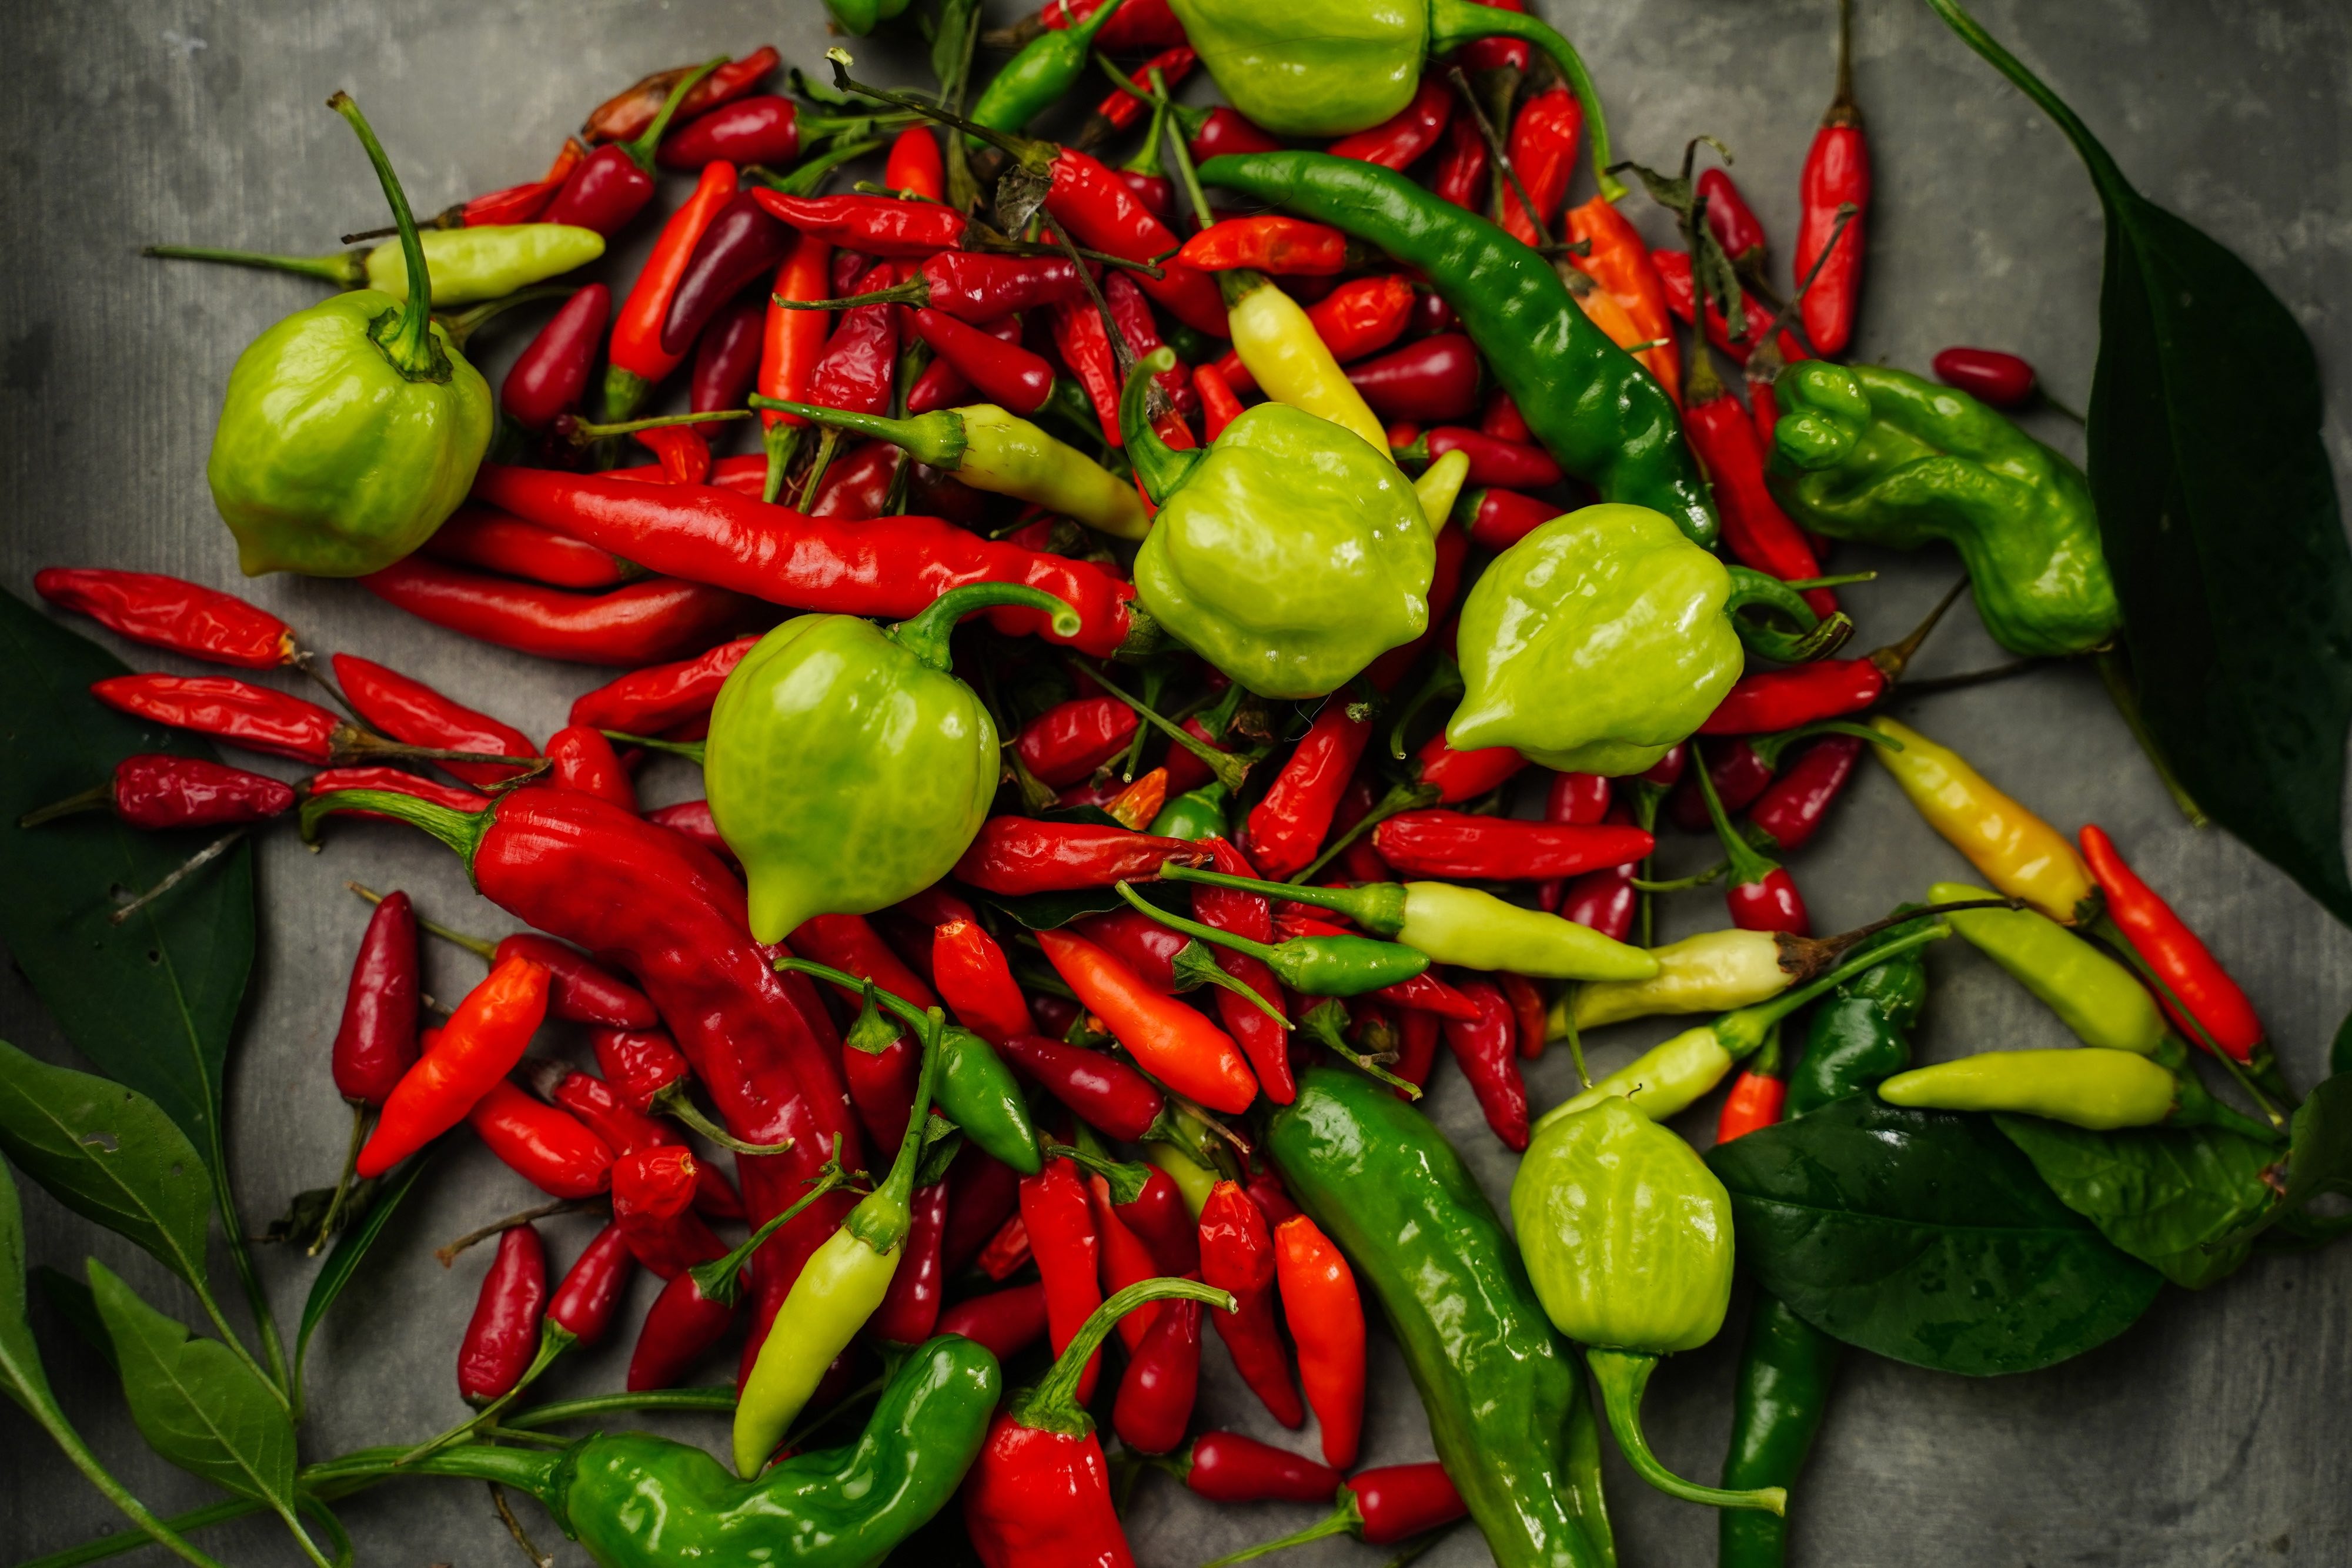 Different types of homegrown chillies or chilli peppers